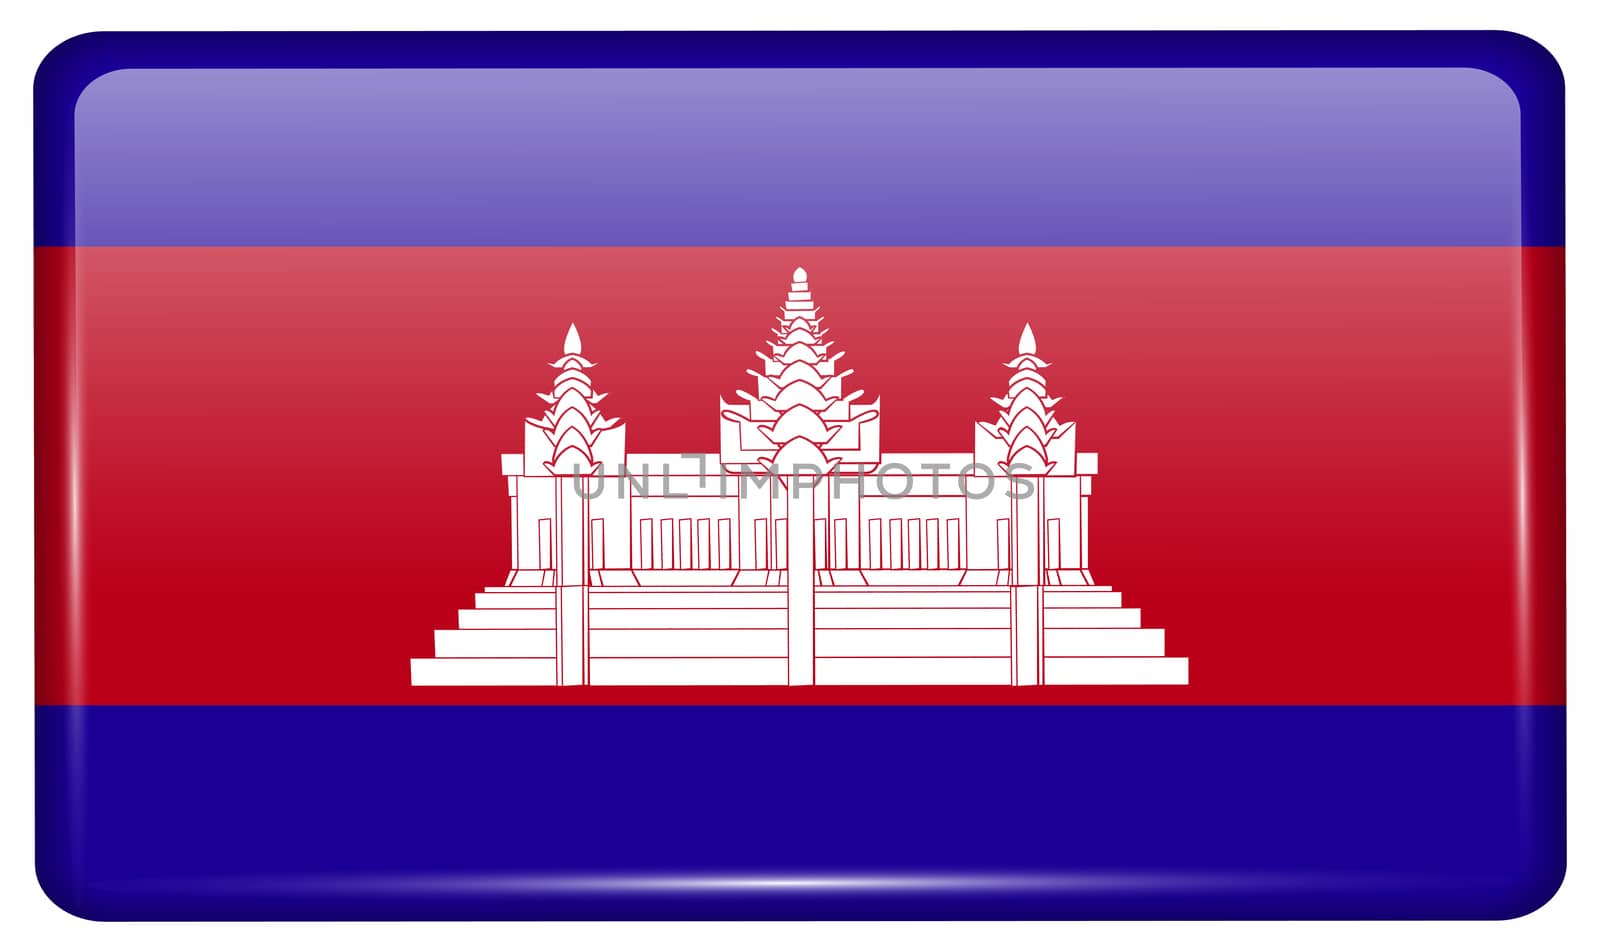 Flags of Cambodia in the form of a magnet on refrigerator with reflections light. illustration